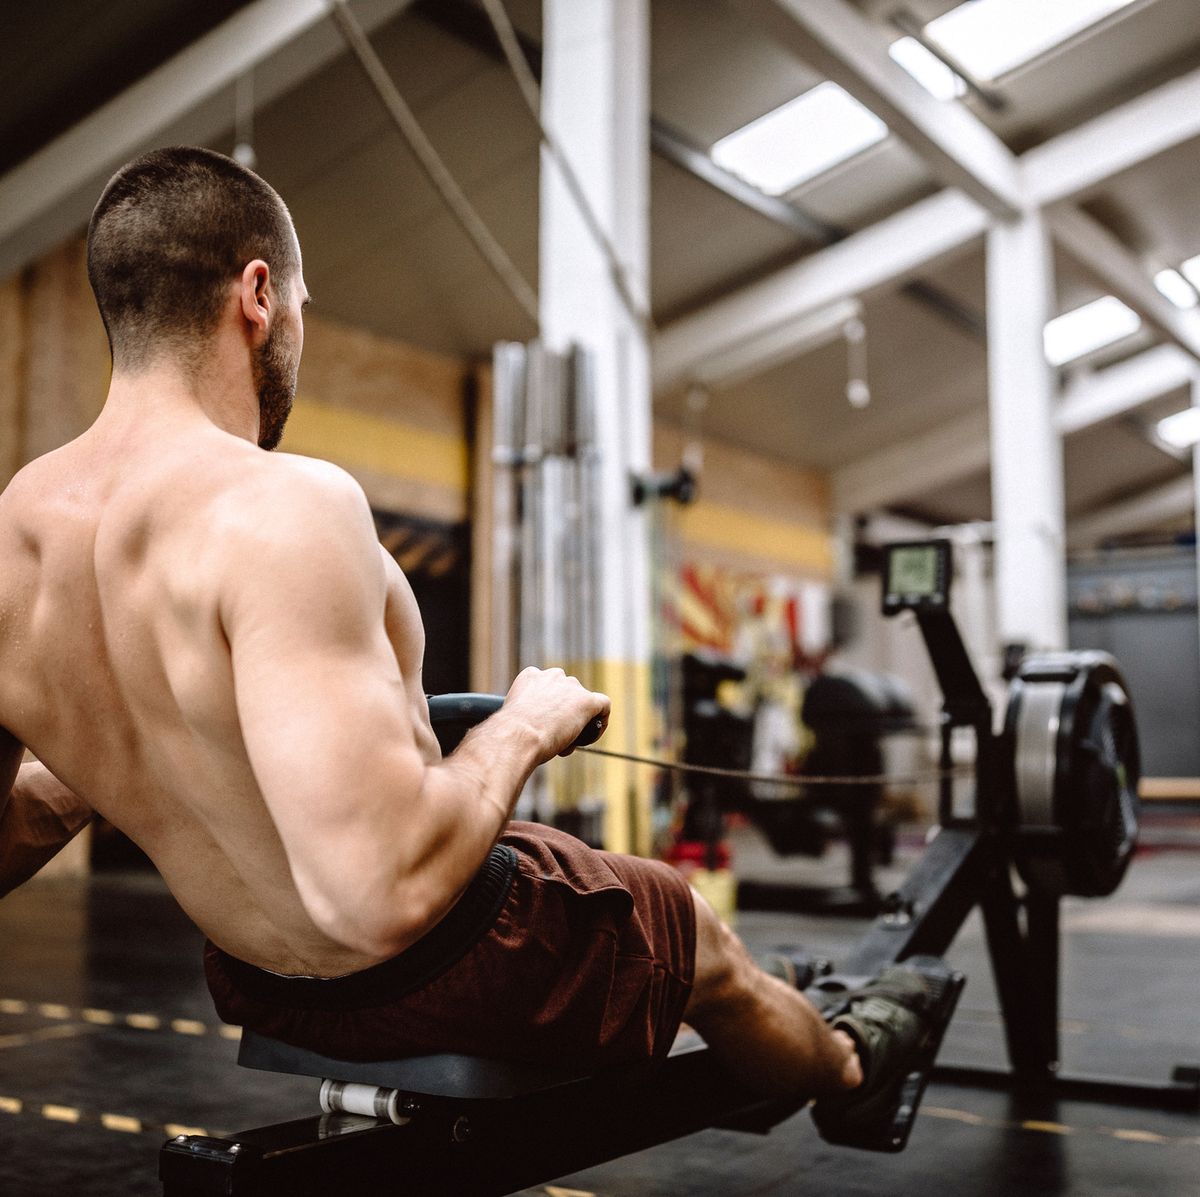 wasserette driehoek Opknappen What Muscles You Work With a Rowing Machine - Rower Workouts